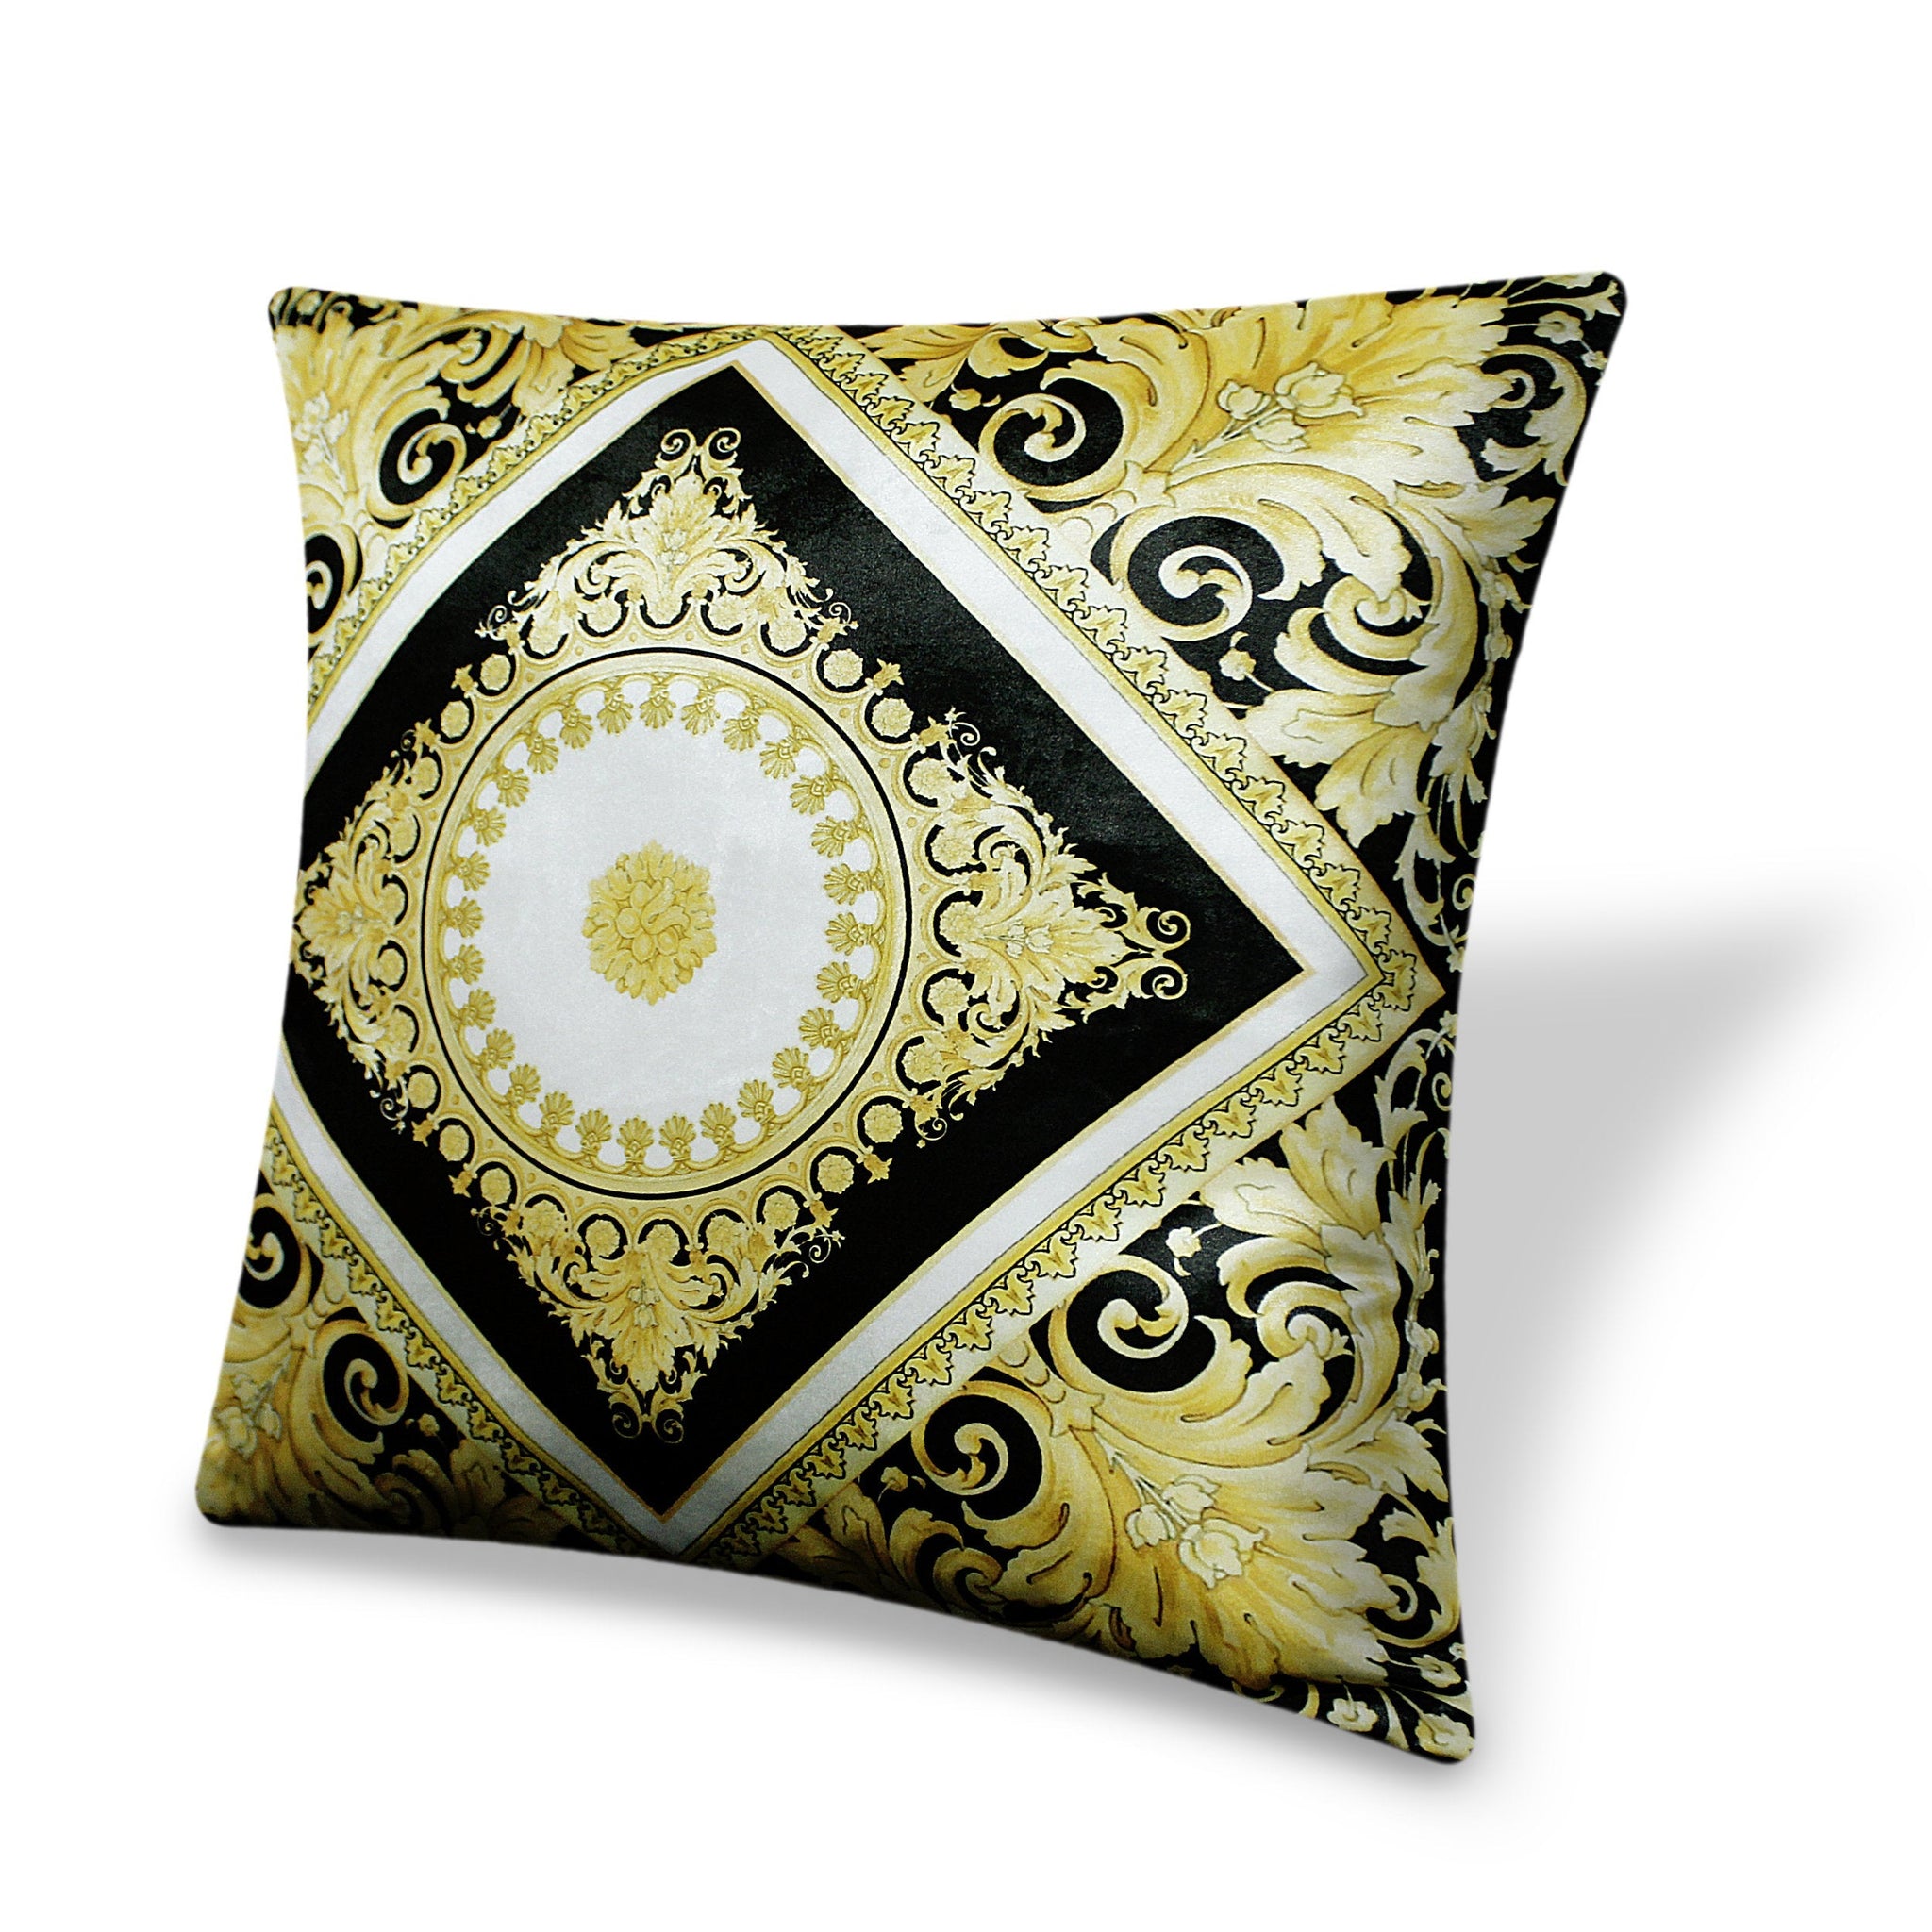 Black Velvet Cushion Cover Baroque Floral Decorative Pillow Cover Home Decor Throw Pillow for Sofa Chair Living Room 45x45 cm 18x18 In